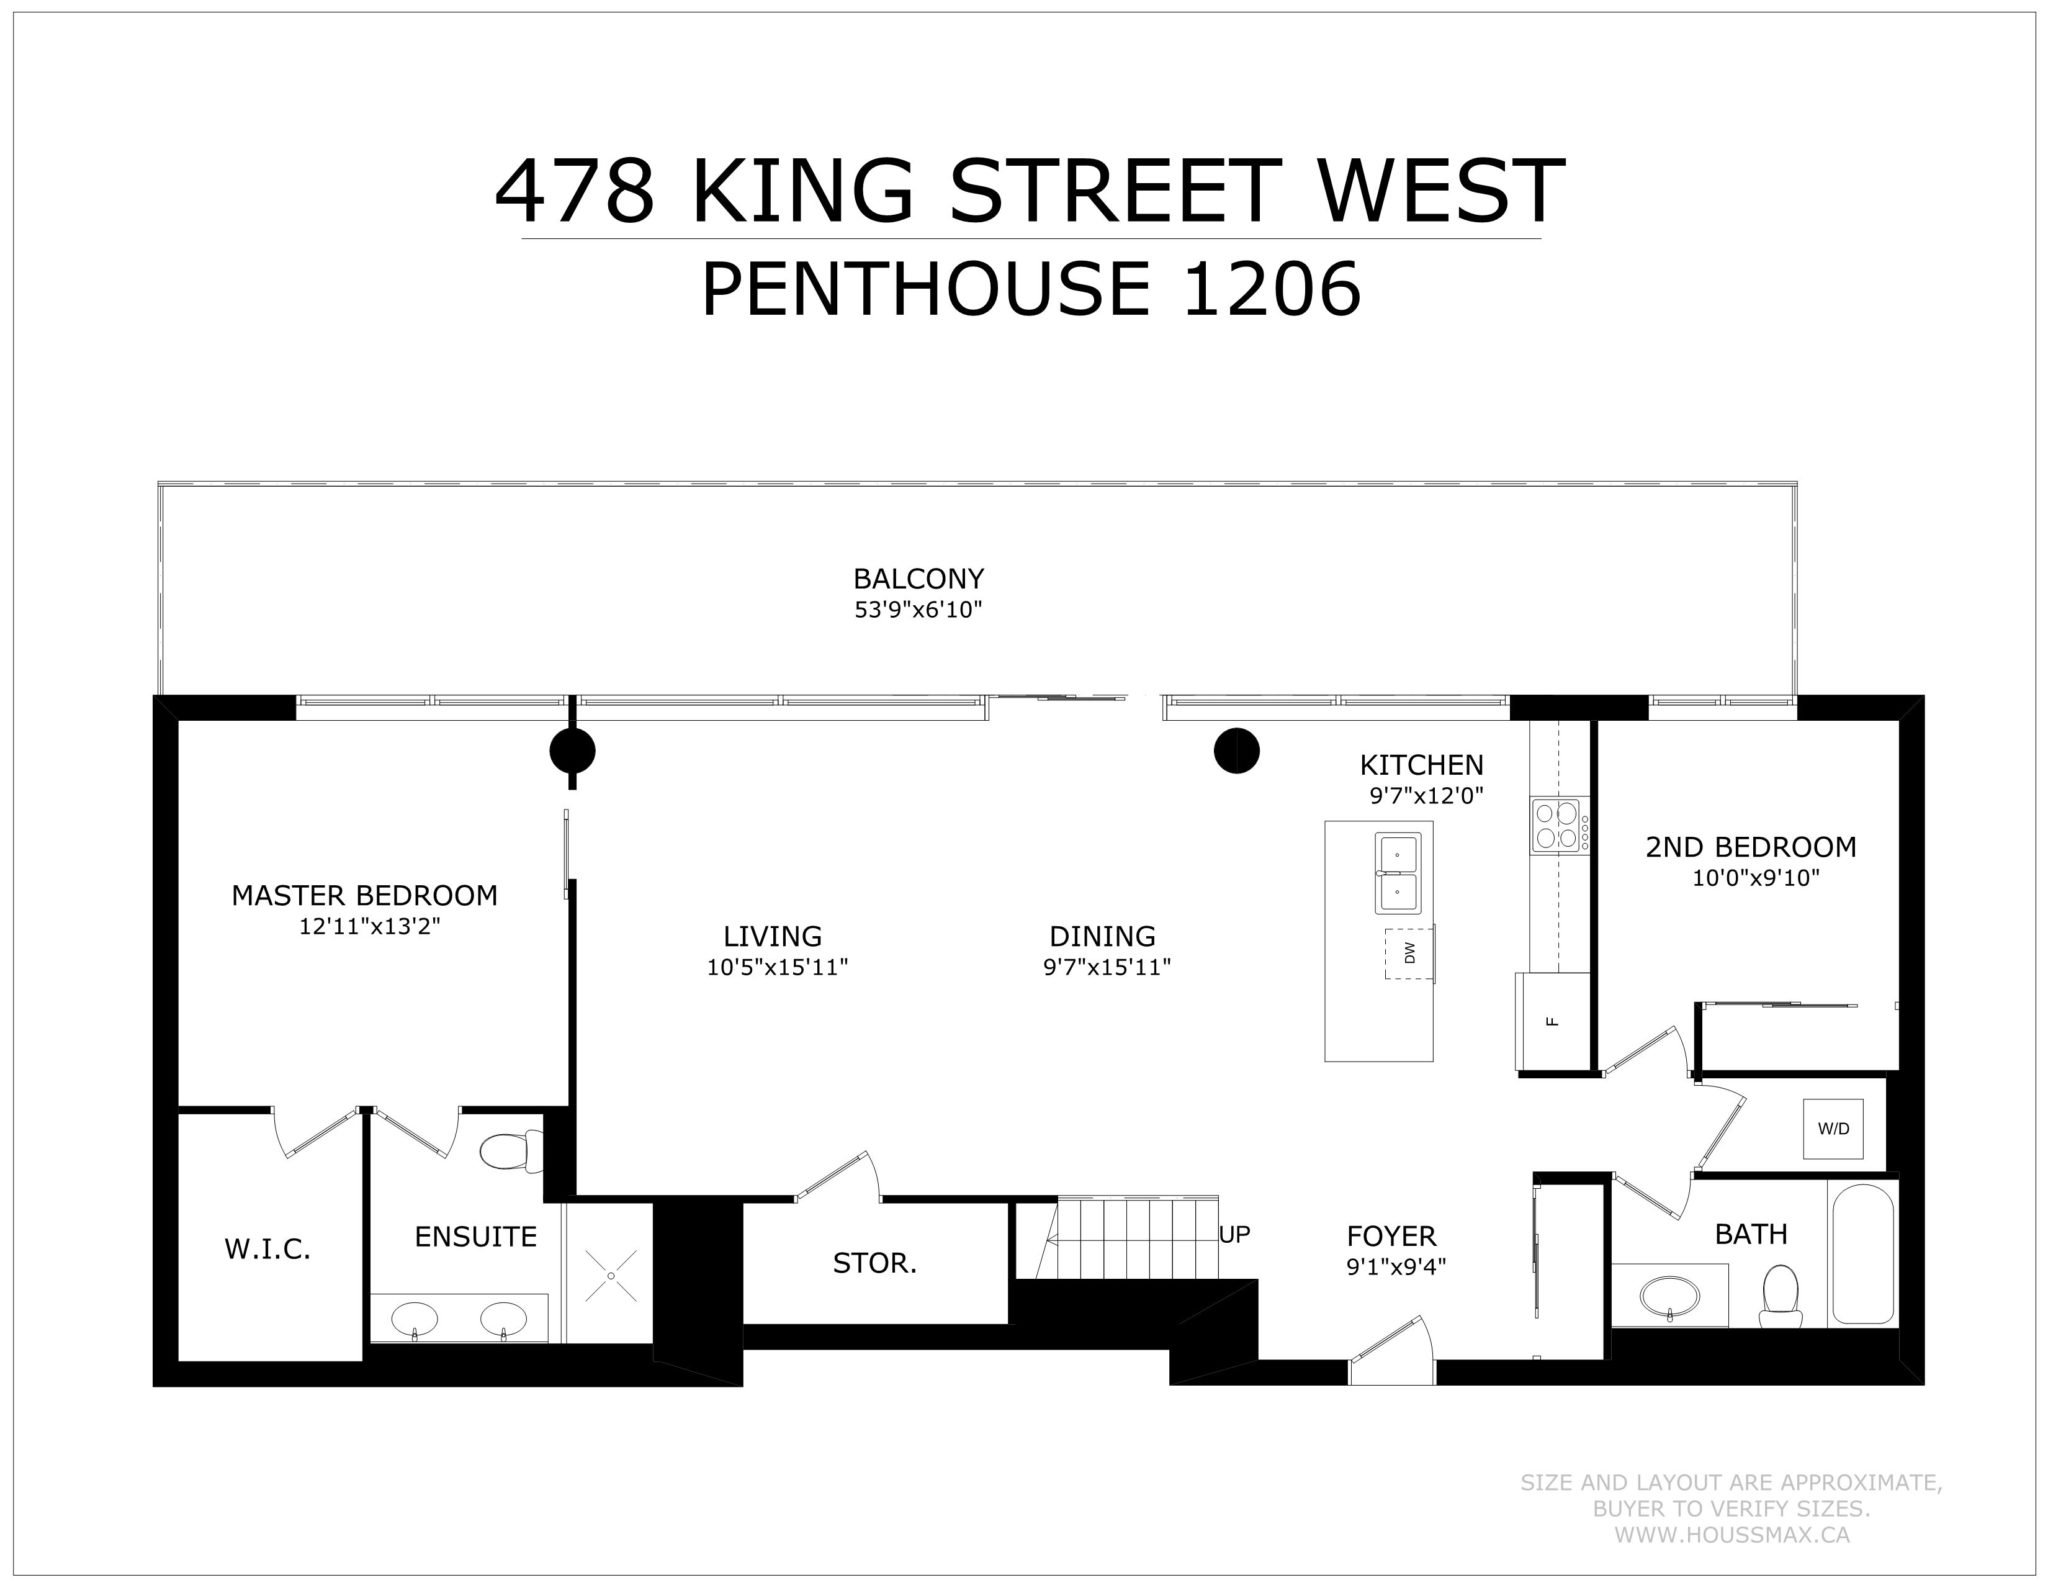 Floor Plans (1st Floor) for Victory Lofts Penthouse Suite in 478 King St W Toronto.